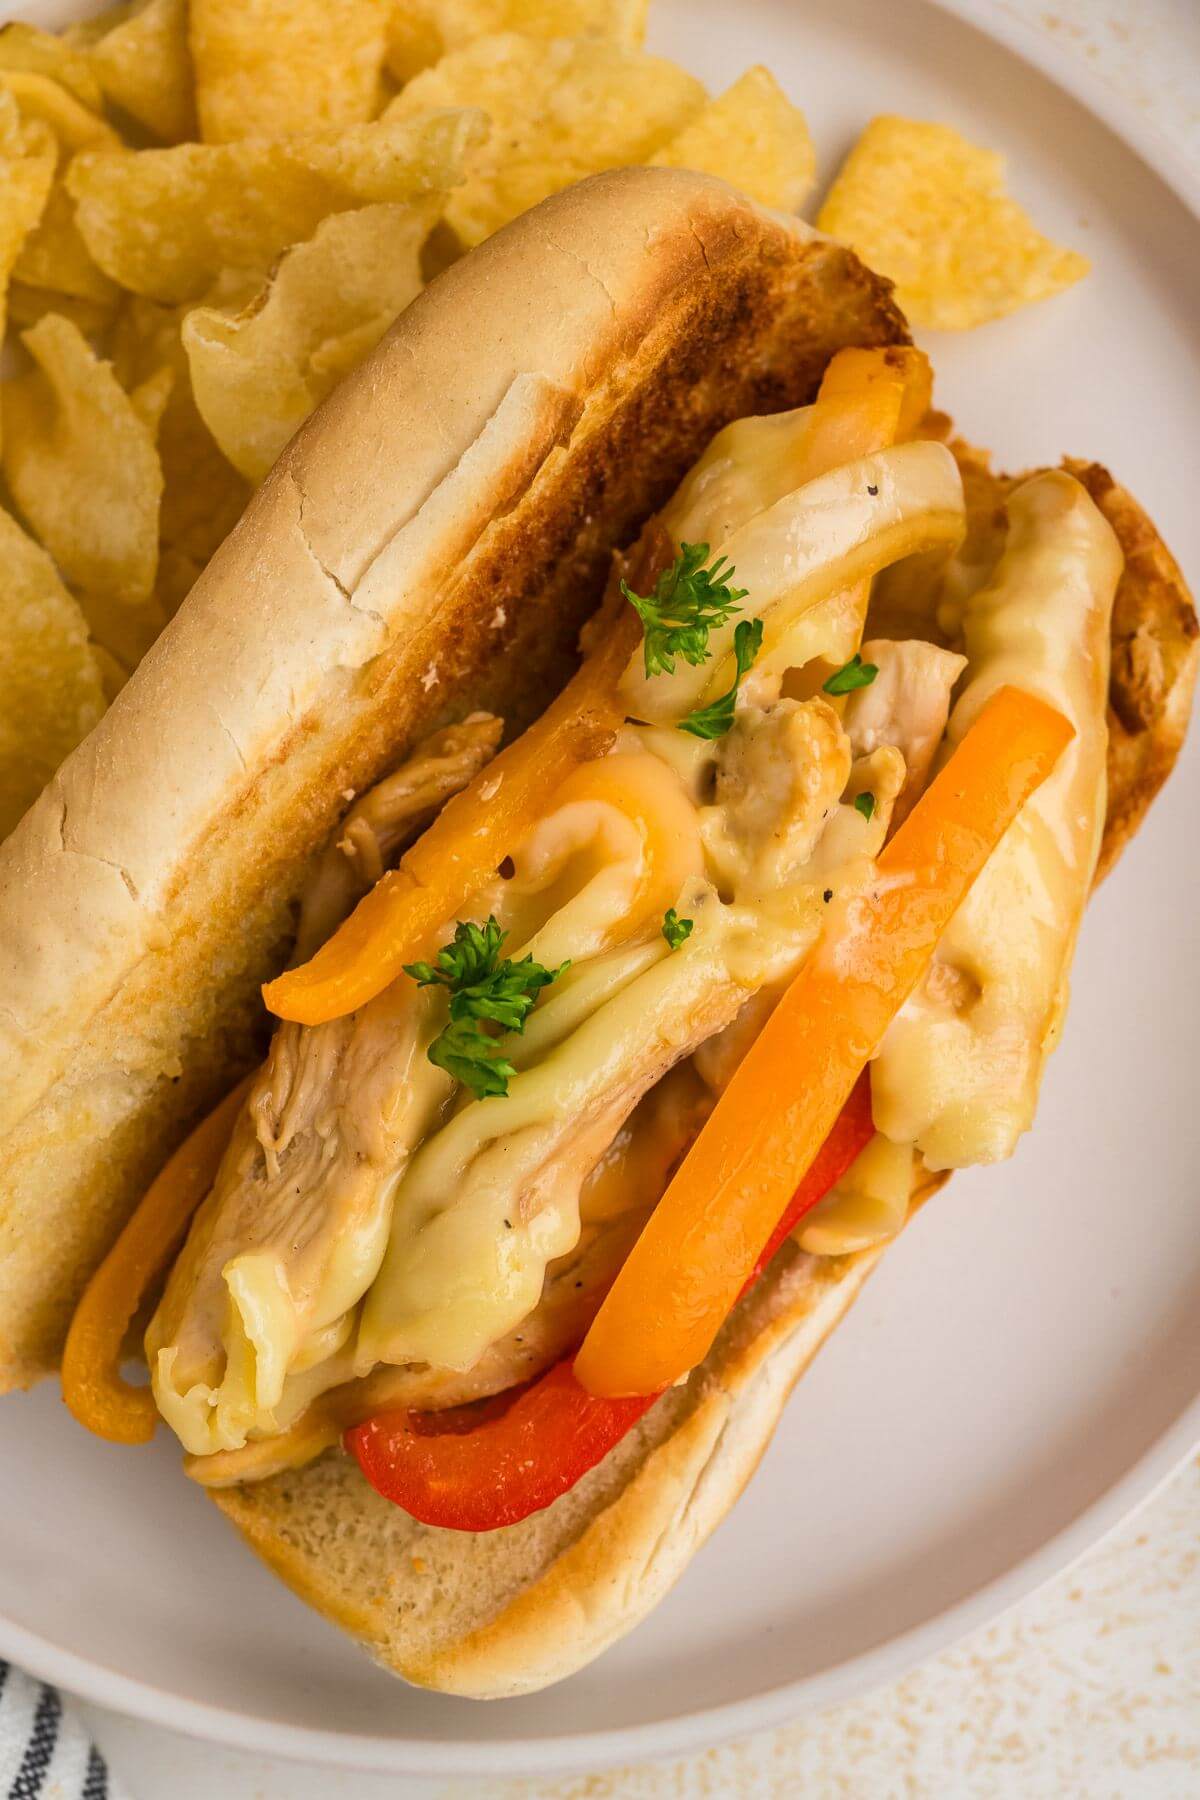 Gooey cheese, tender chicken chunks, and bright bell peppers fill a Hoagie roll next to potato chips.